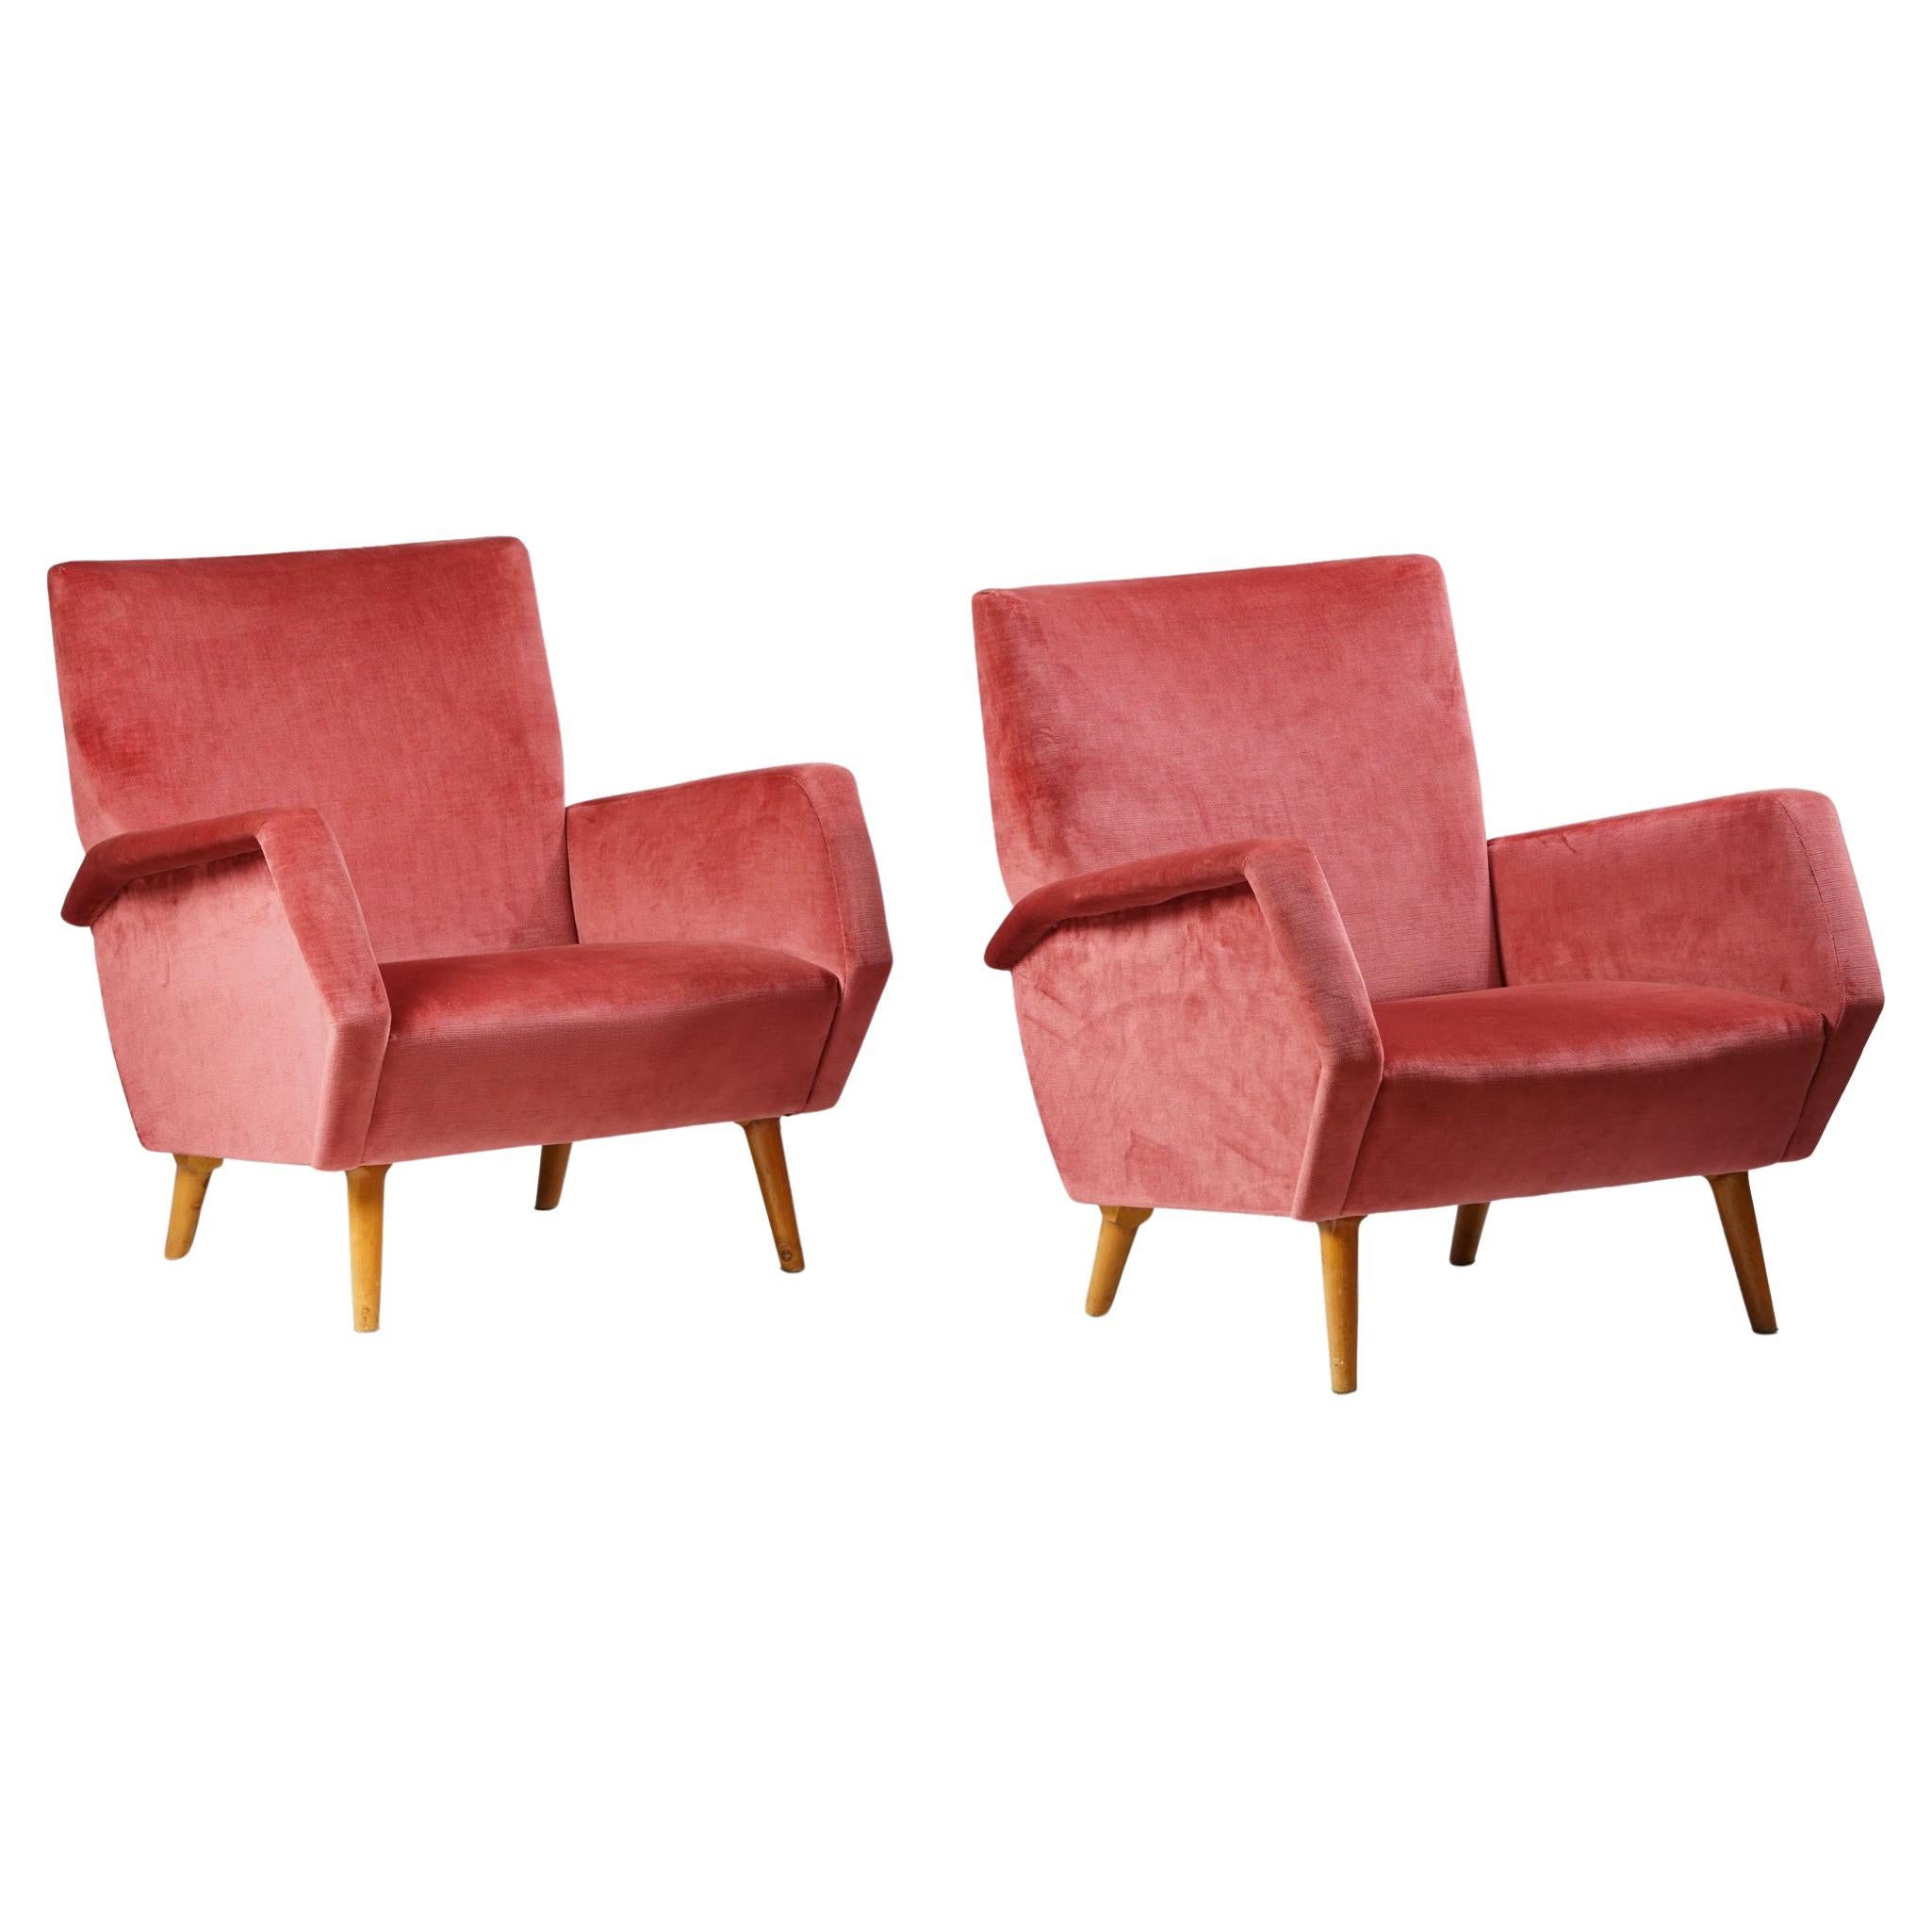 A Pair of Model 803 Armchairs by Gio Ponti for Cassina, 1950s  For Sale